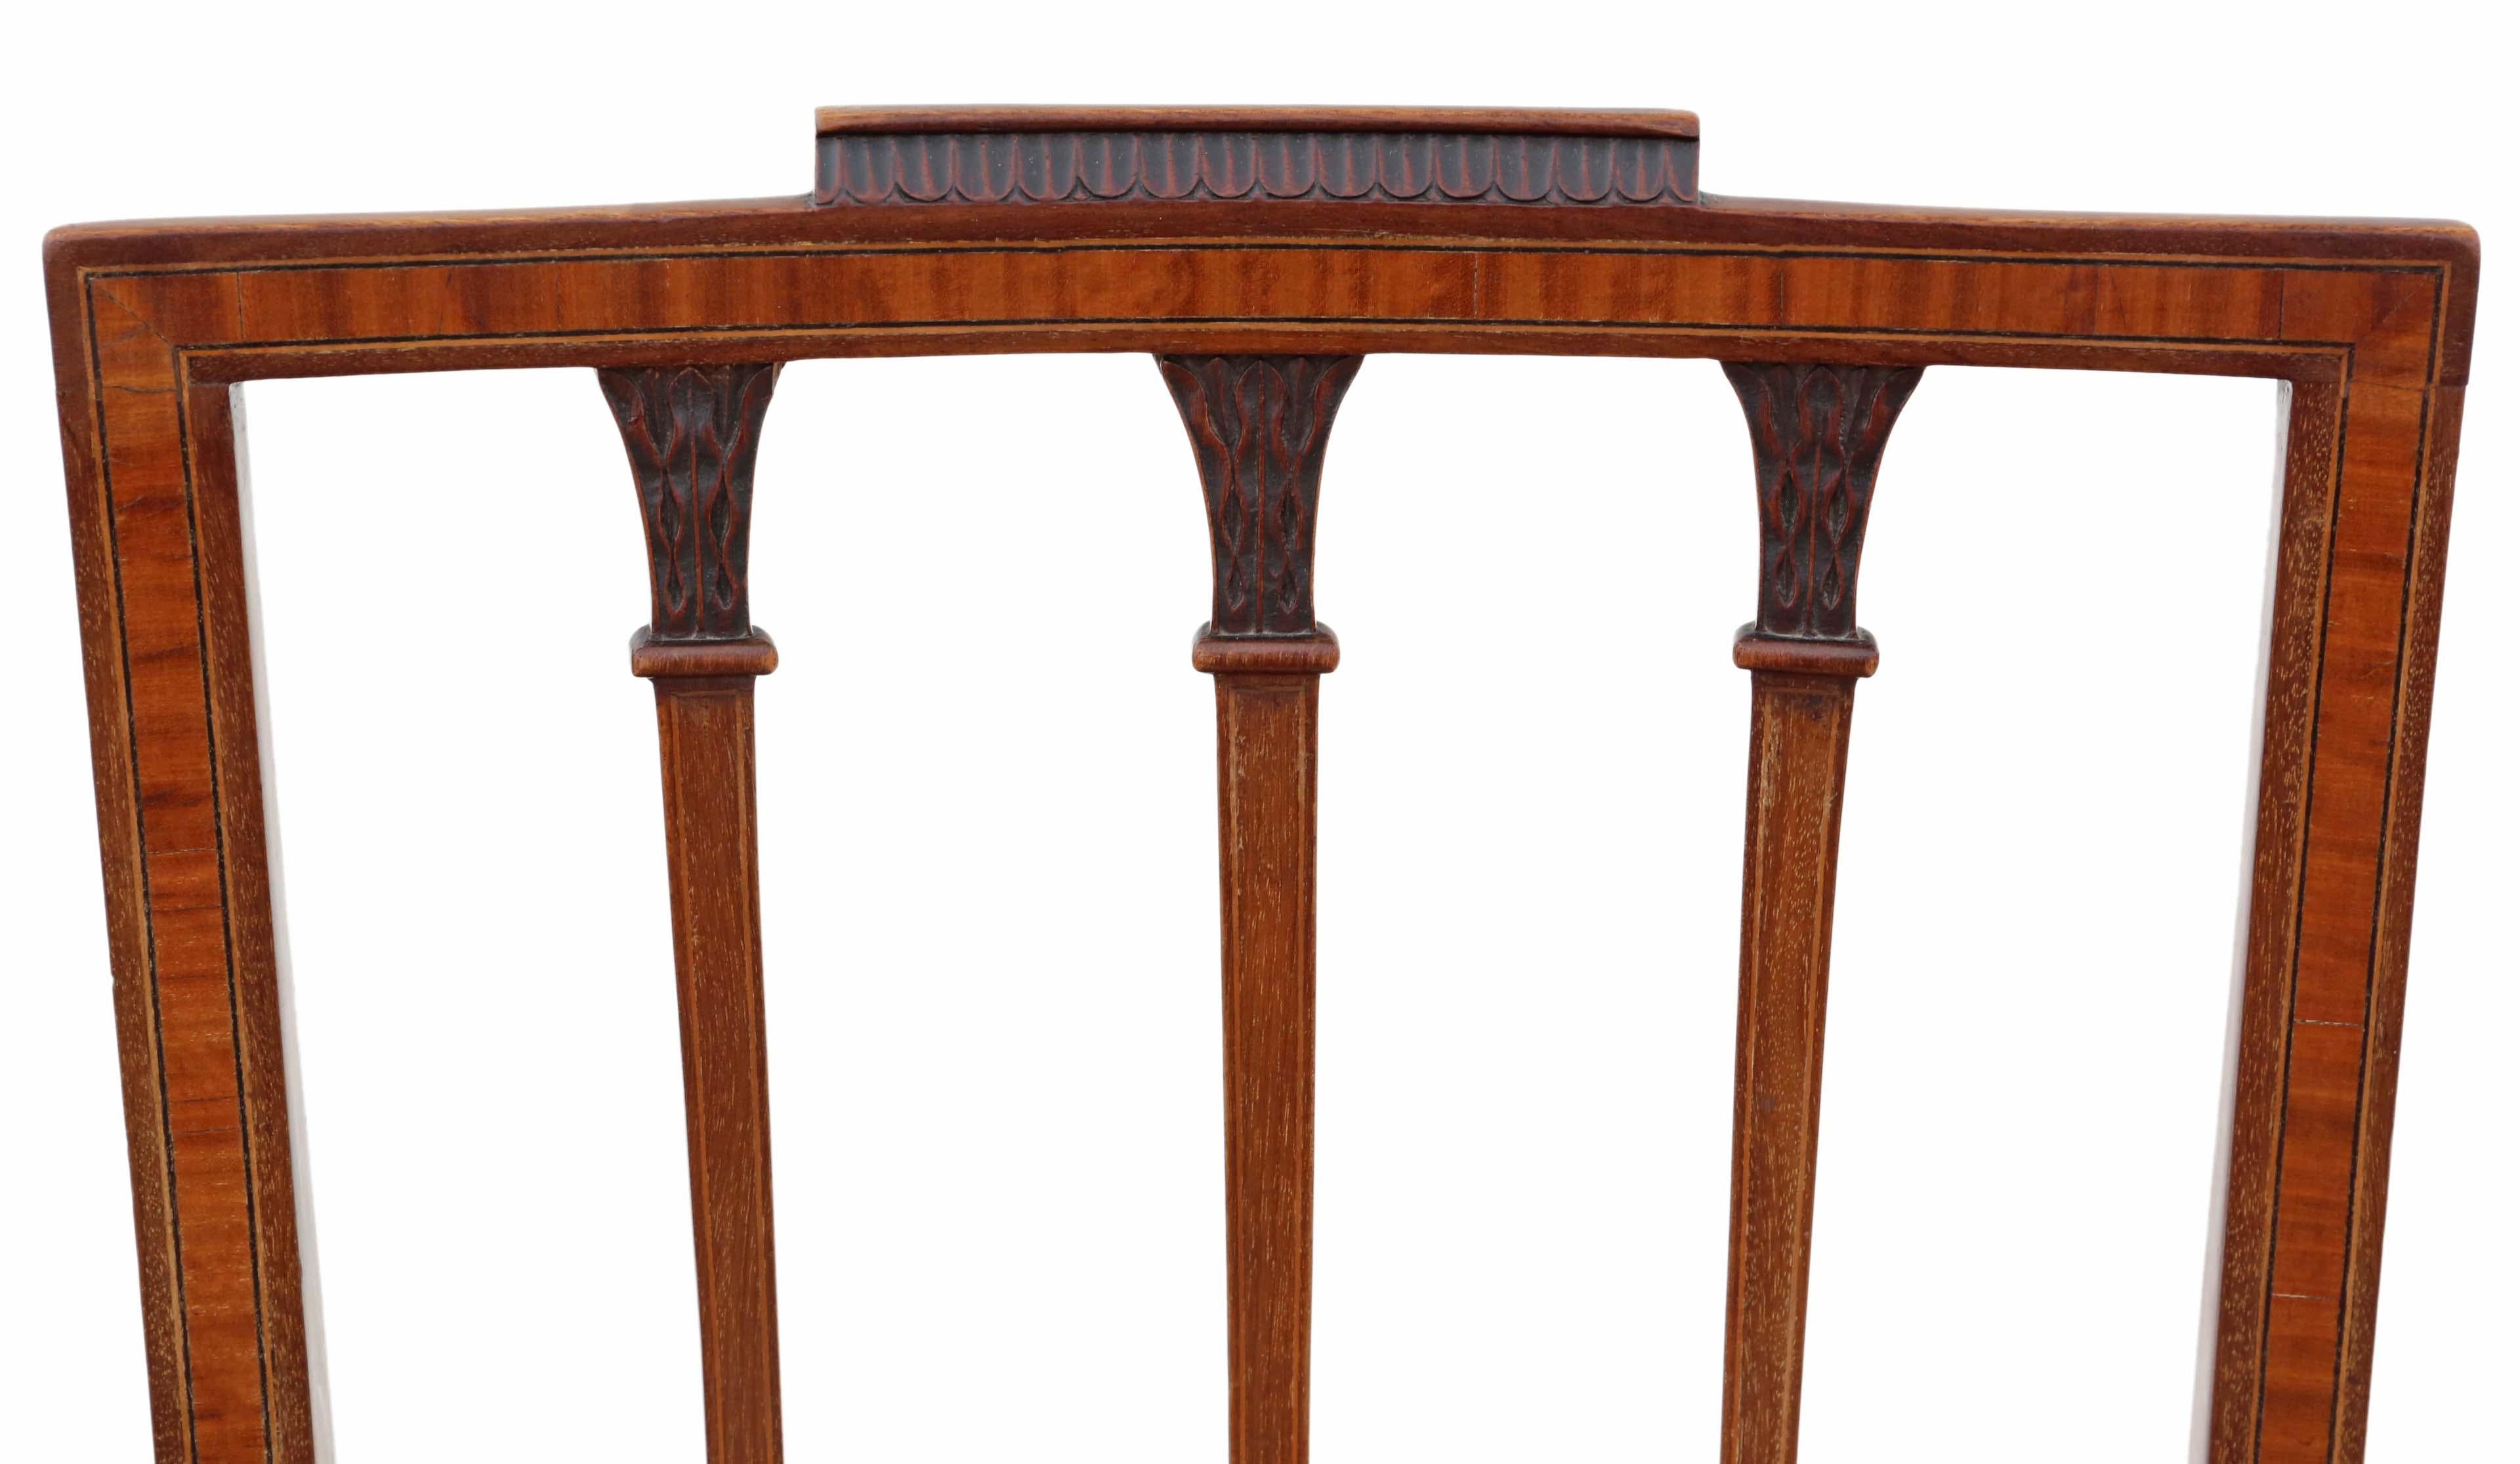 Georgian Revival Mahogany Dining Chairs: Set of 8 (6 + 2), Antique Quality, C190 For Sale 2